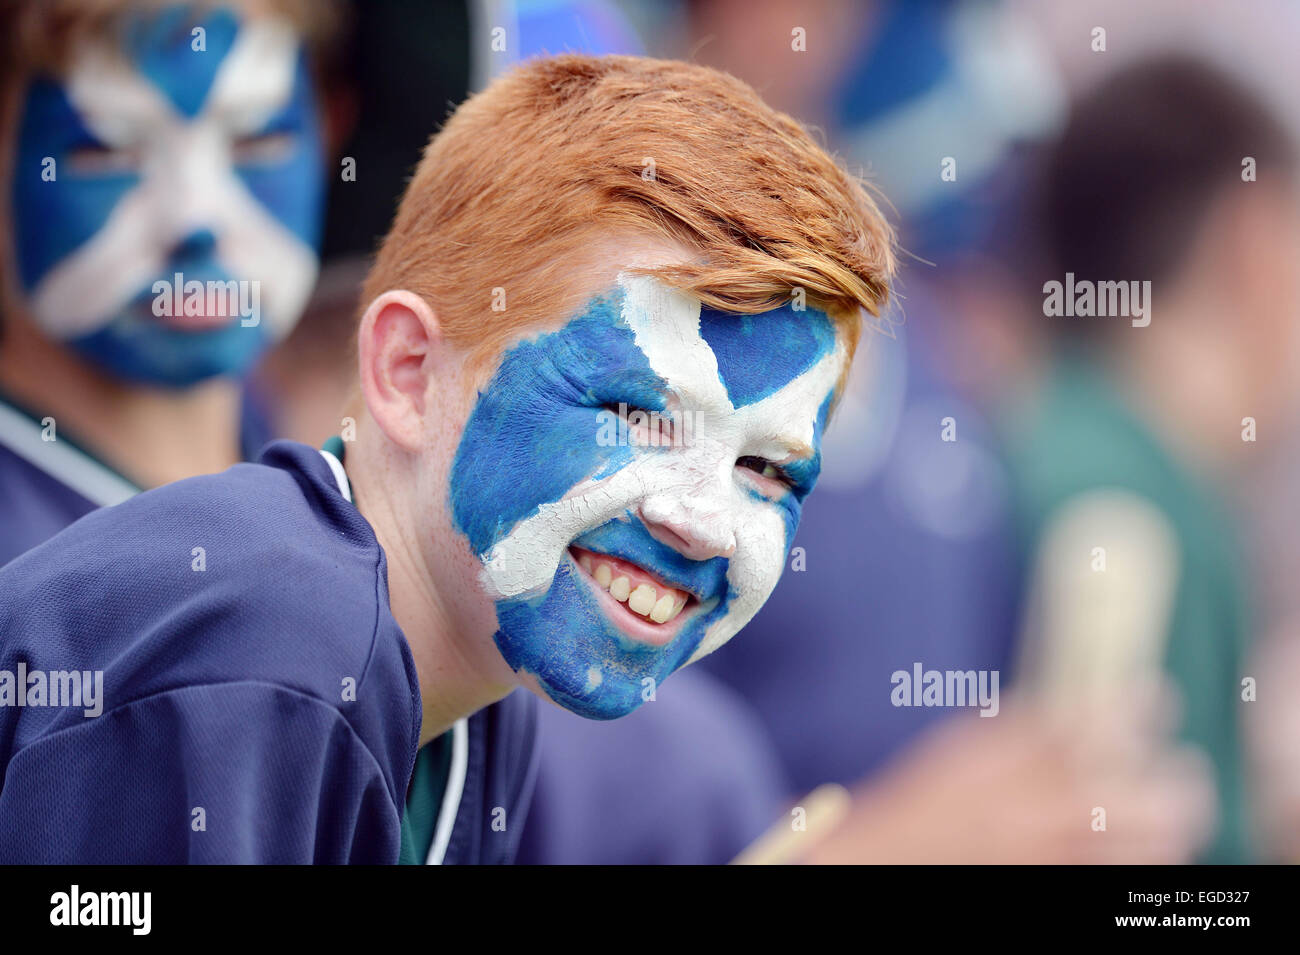 Christchurch, New Zealand, Feature, Highlight. 23rd Feb, 2015. Christchurch, New Zealand - February 23, 2015 - A young scottish fan shows his support by having the Saint Andrew's Cross, flag of Scotland, painted at his face during the ICC Cricket World Cup Match between England and Scotland at Hagley Oval on February 23, 2015 in Christchurch, New Zealand, Feature, Highlight. Credit:  dpa/Alamy Live News Stock Photo